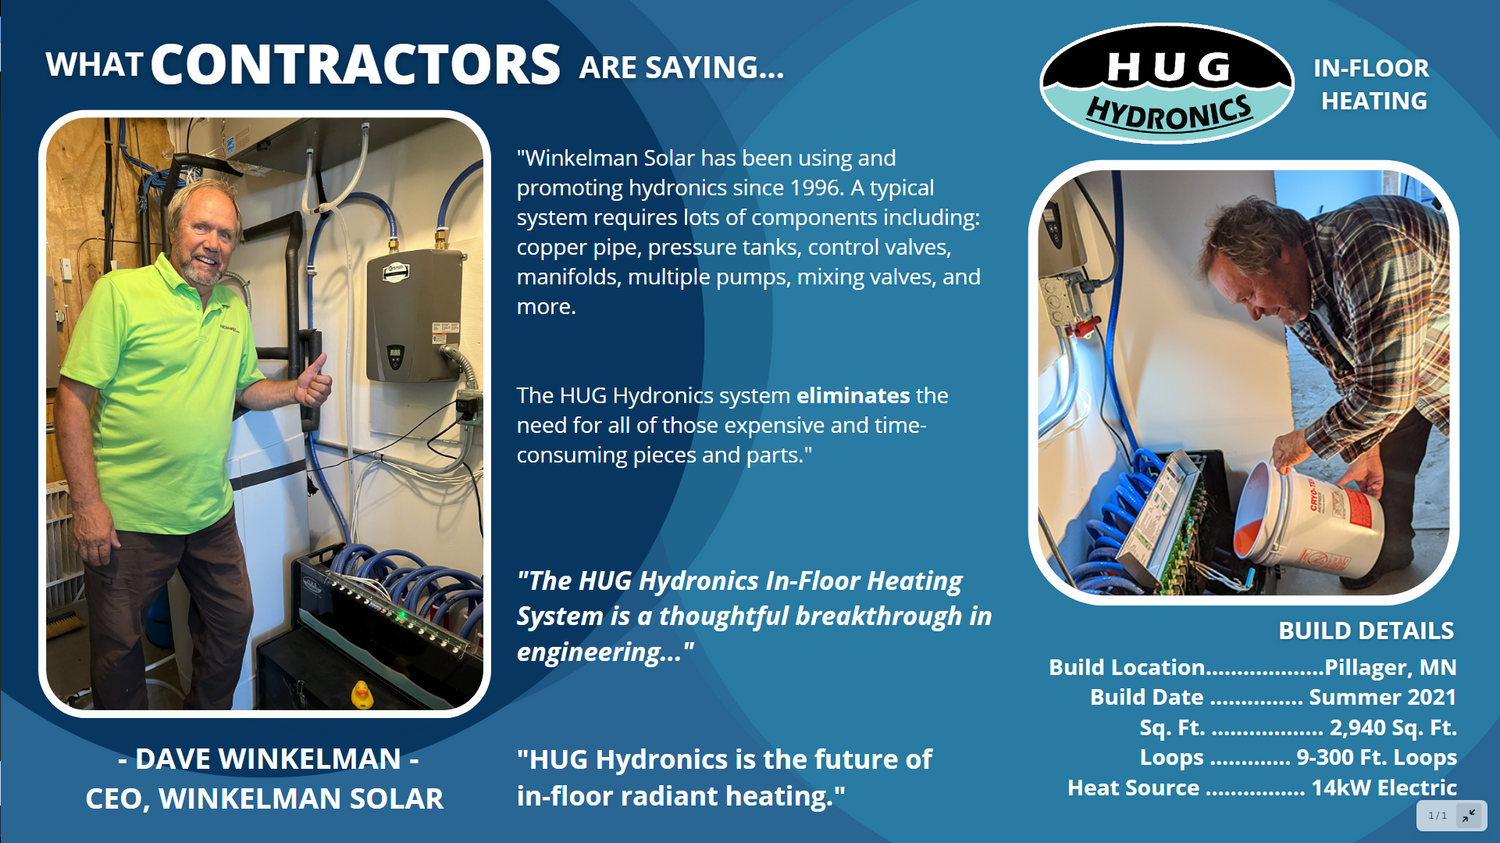 HUG Hydronics eliminates the need for all those expensive parts